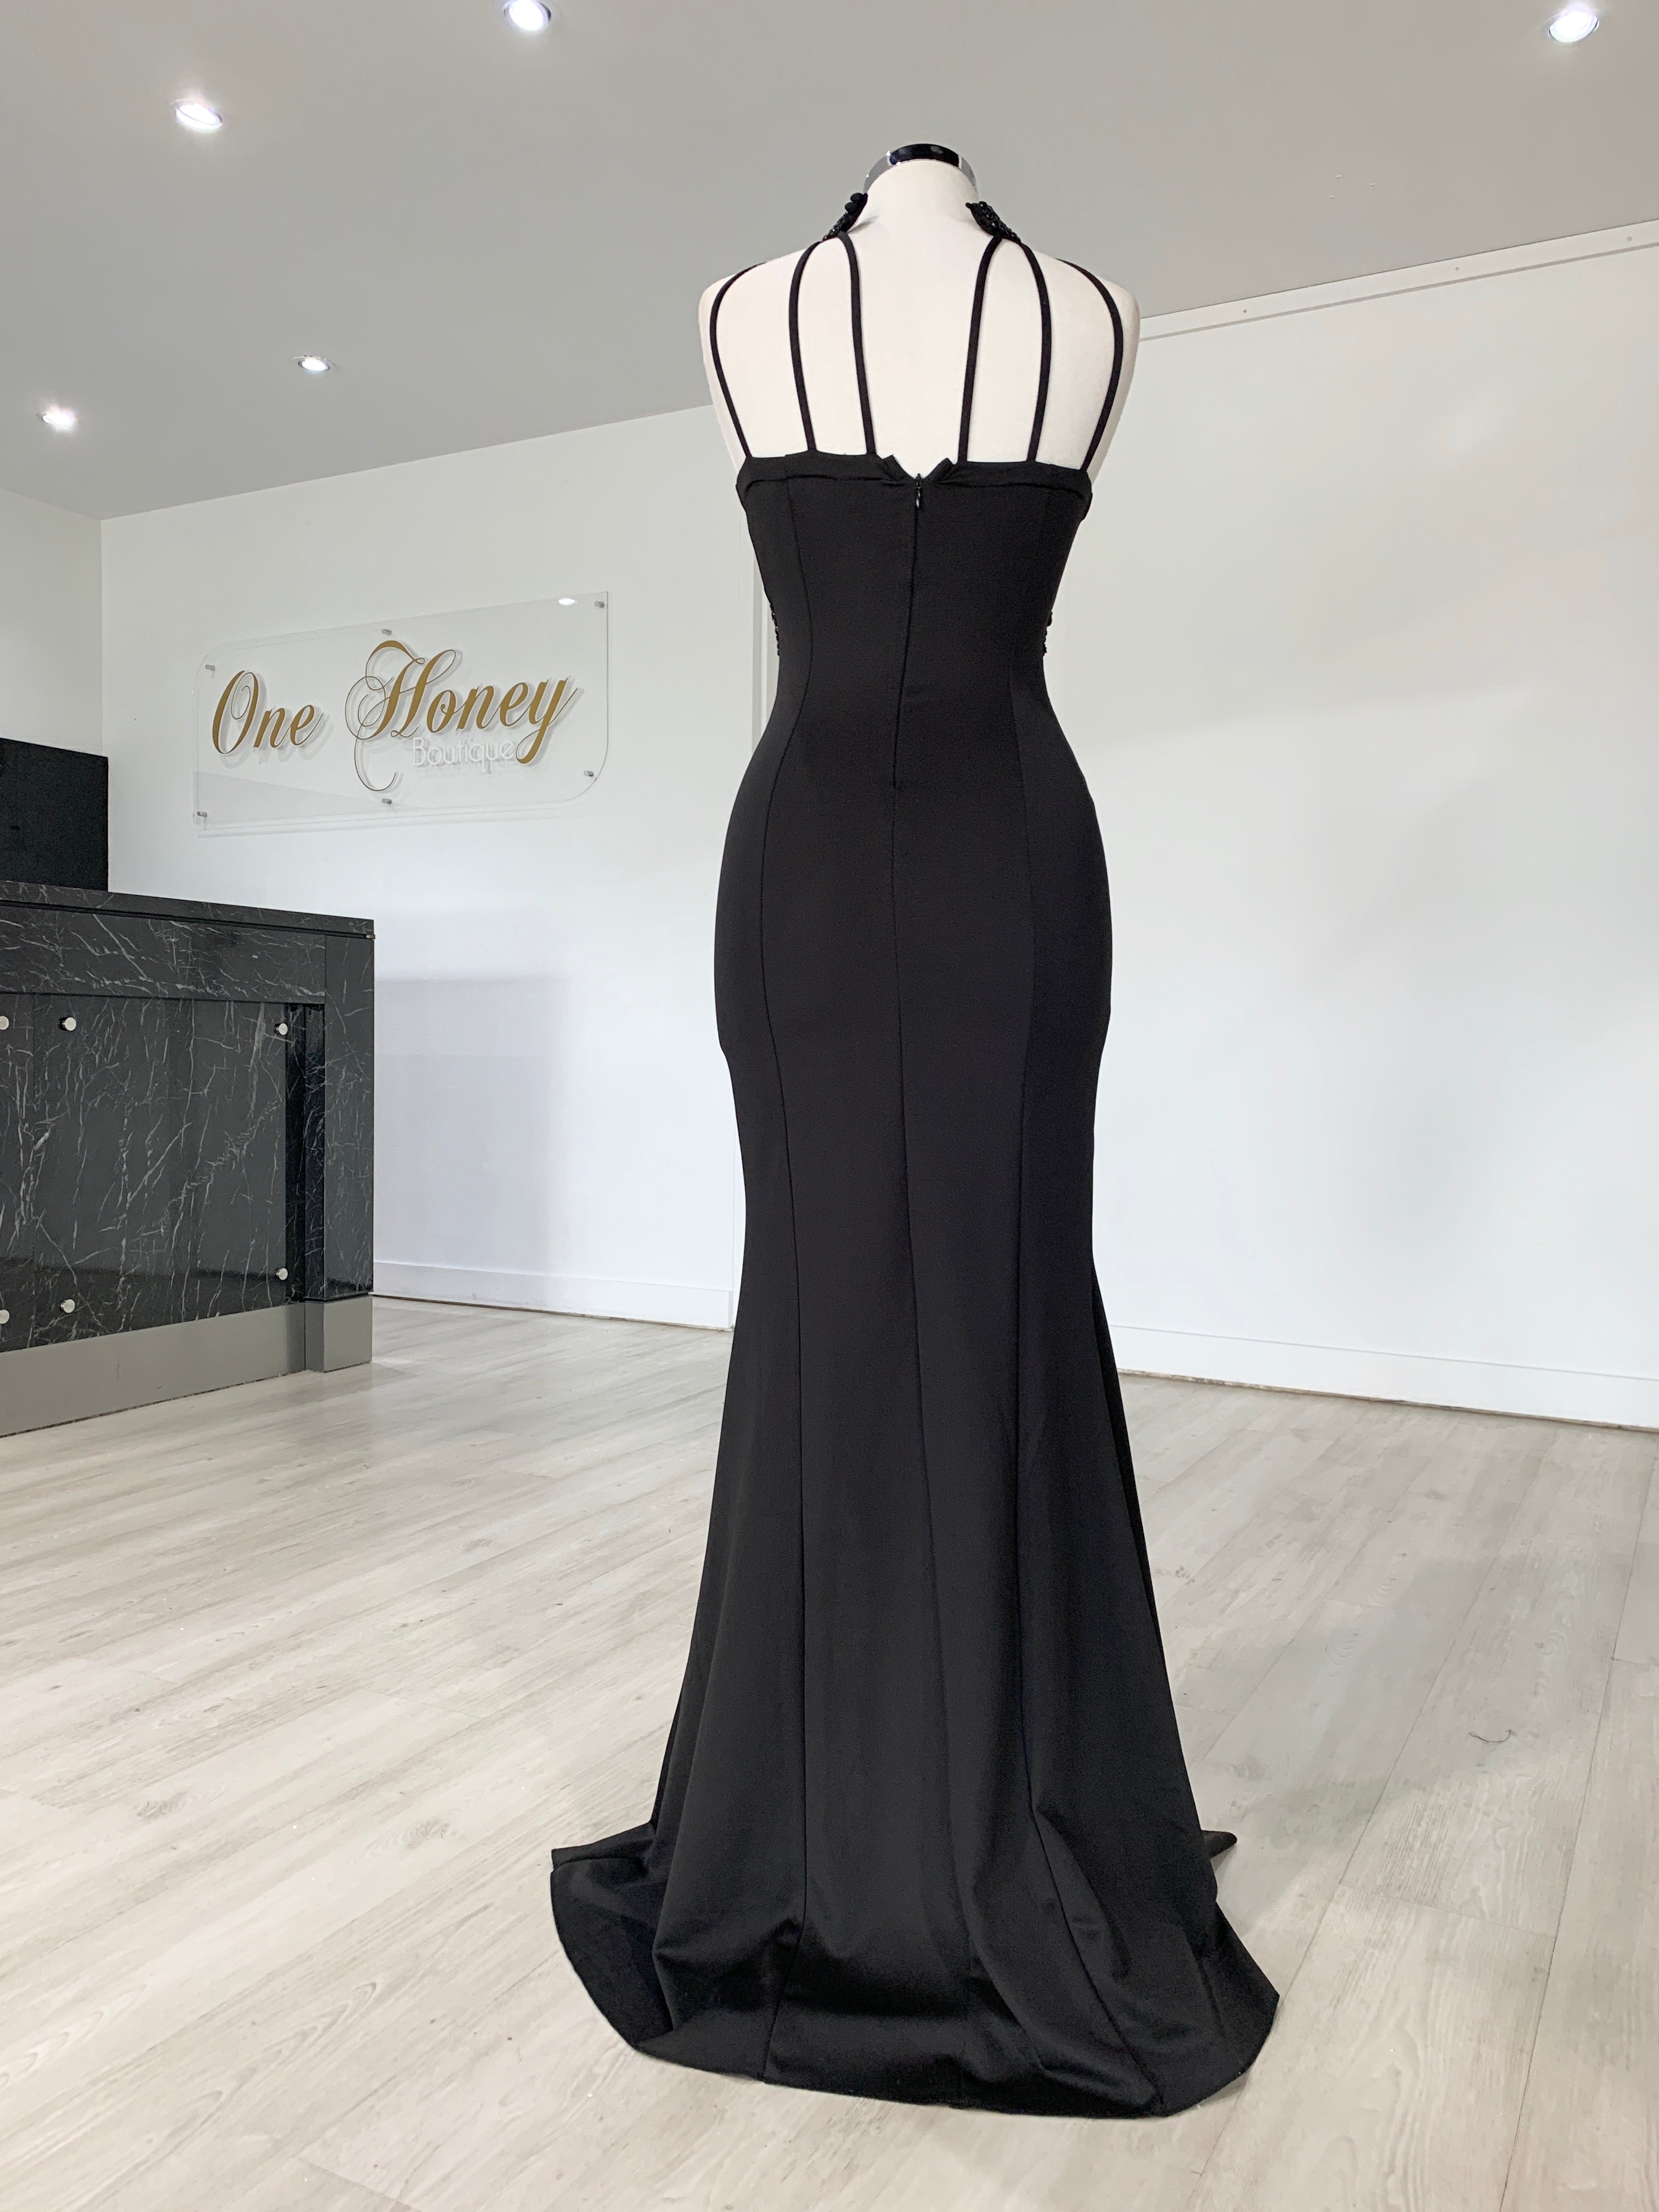 Honey Couture VALERIA Black Beaded Halter Formal Gown {vendor} AfterPay Humm ZipPay LayBuy Sezzle